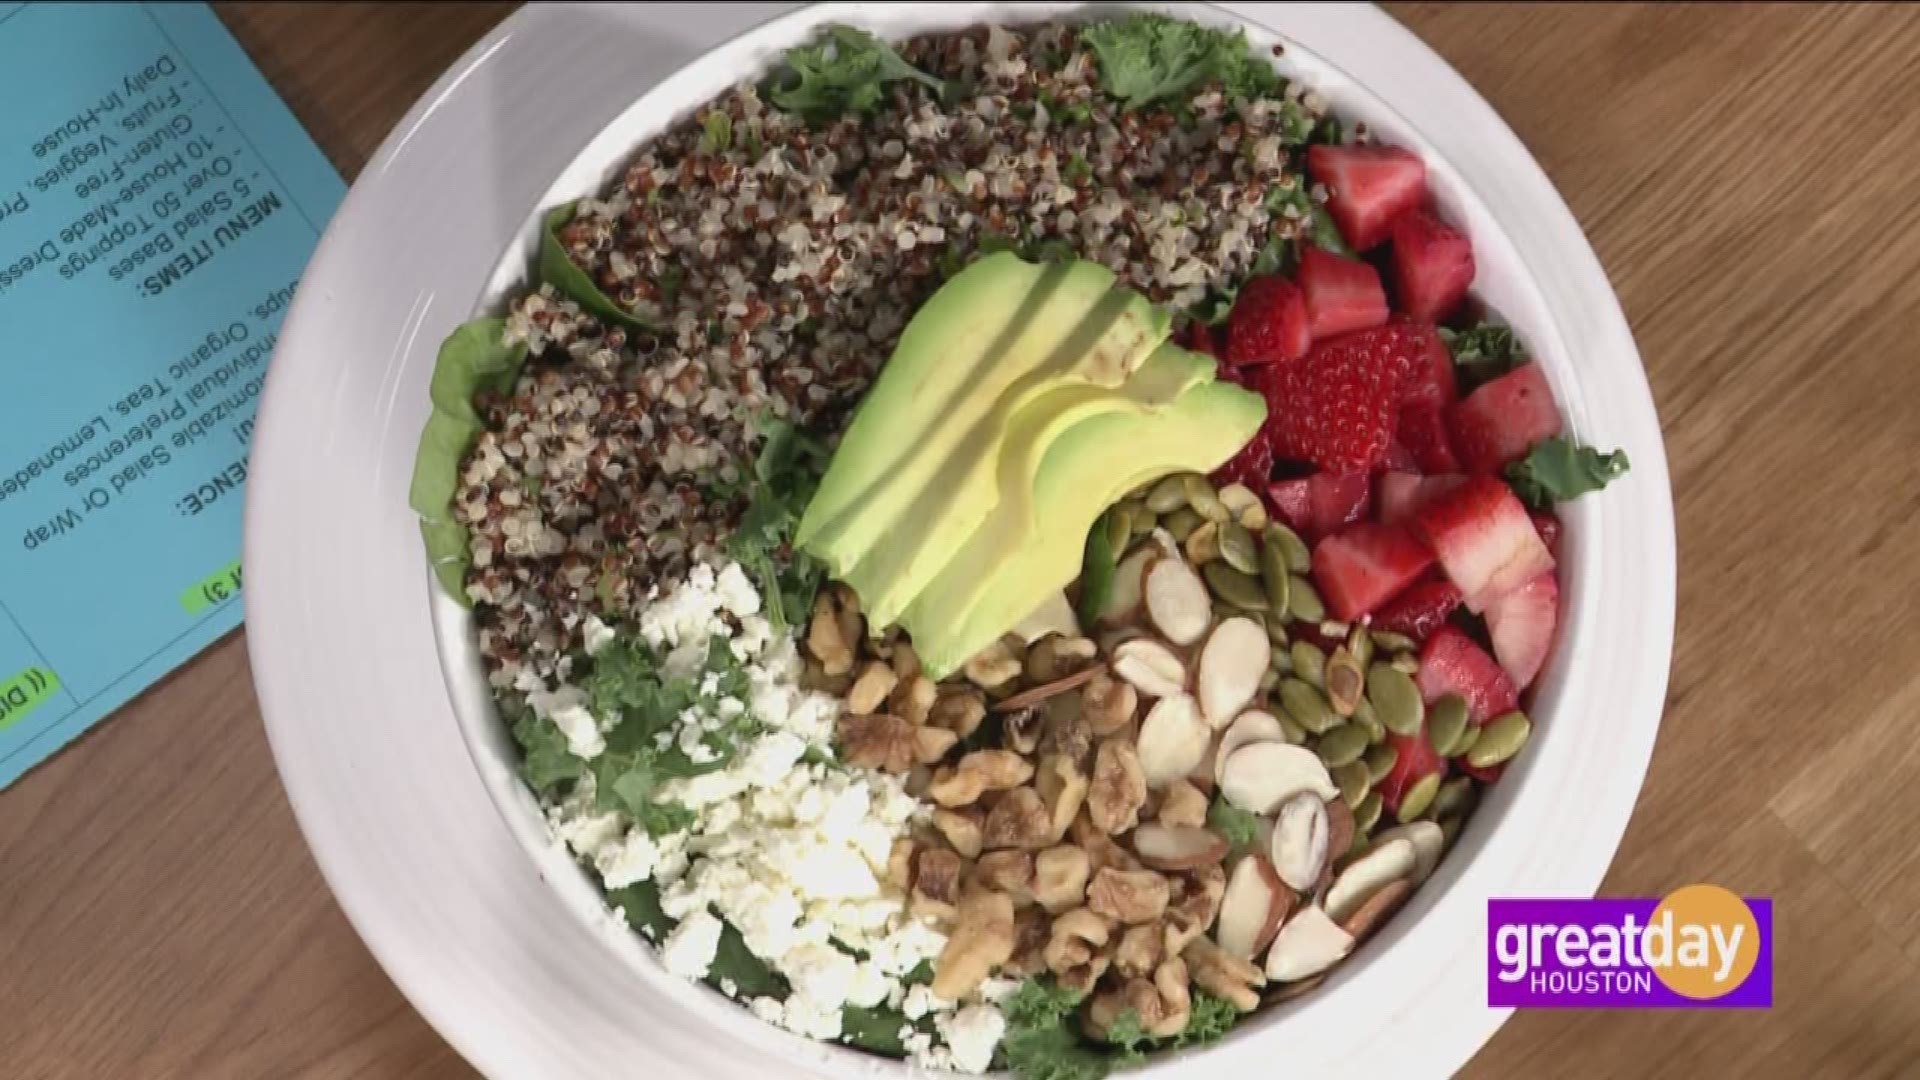 Amy Haynes tosses up some fresh ideas on delicious and healthy customized salads